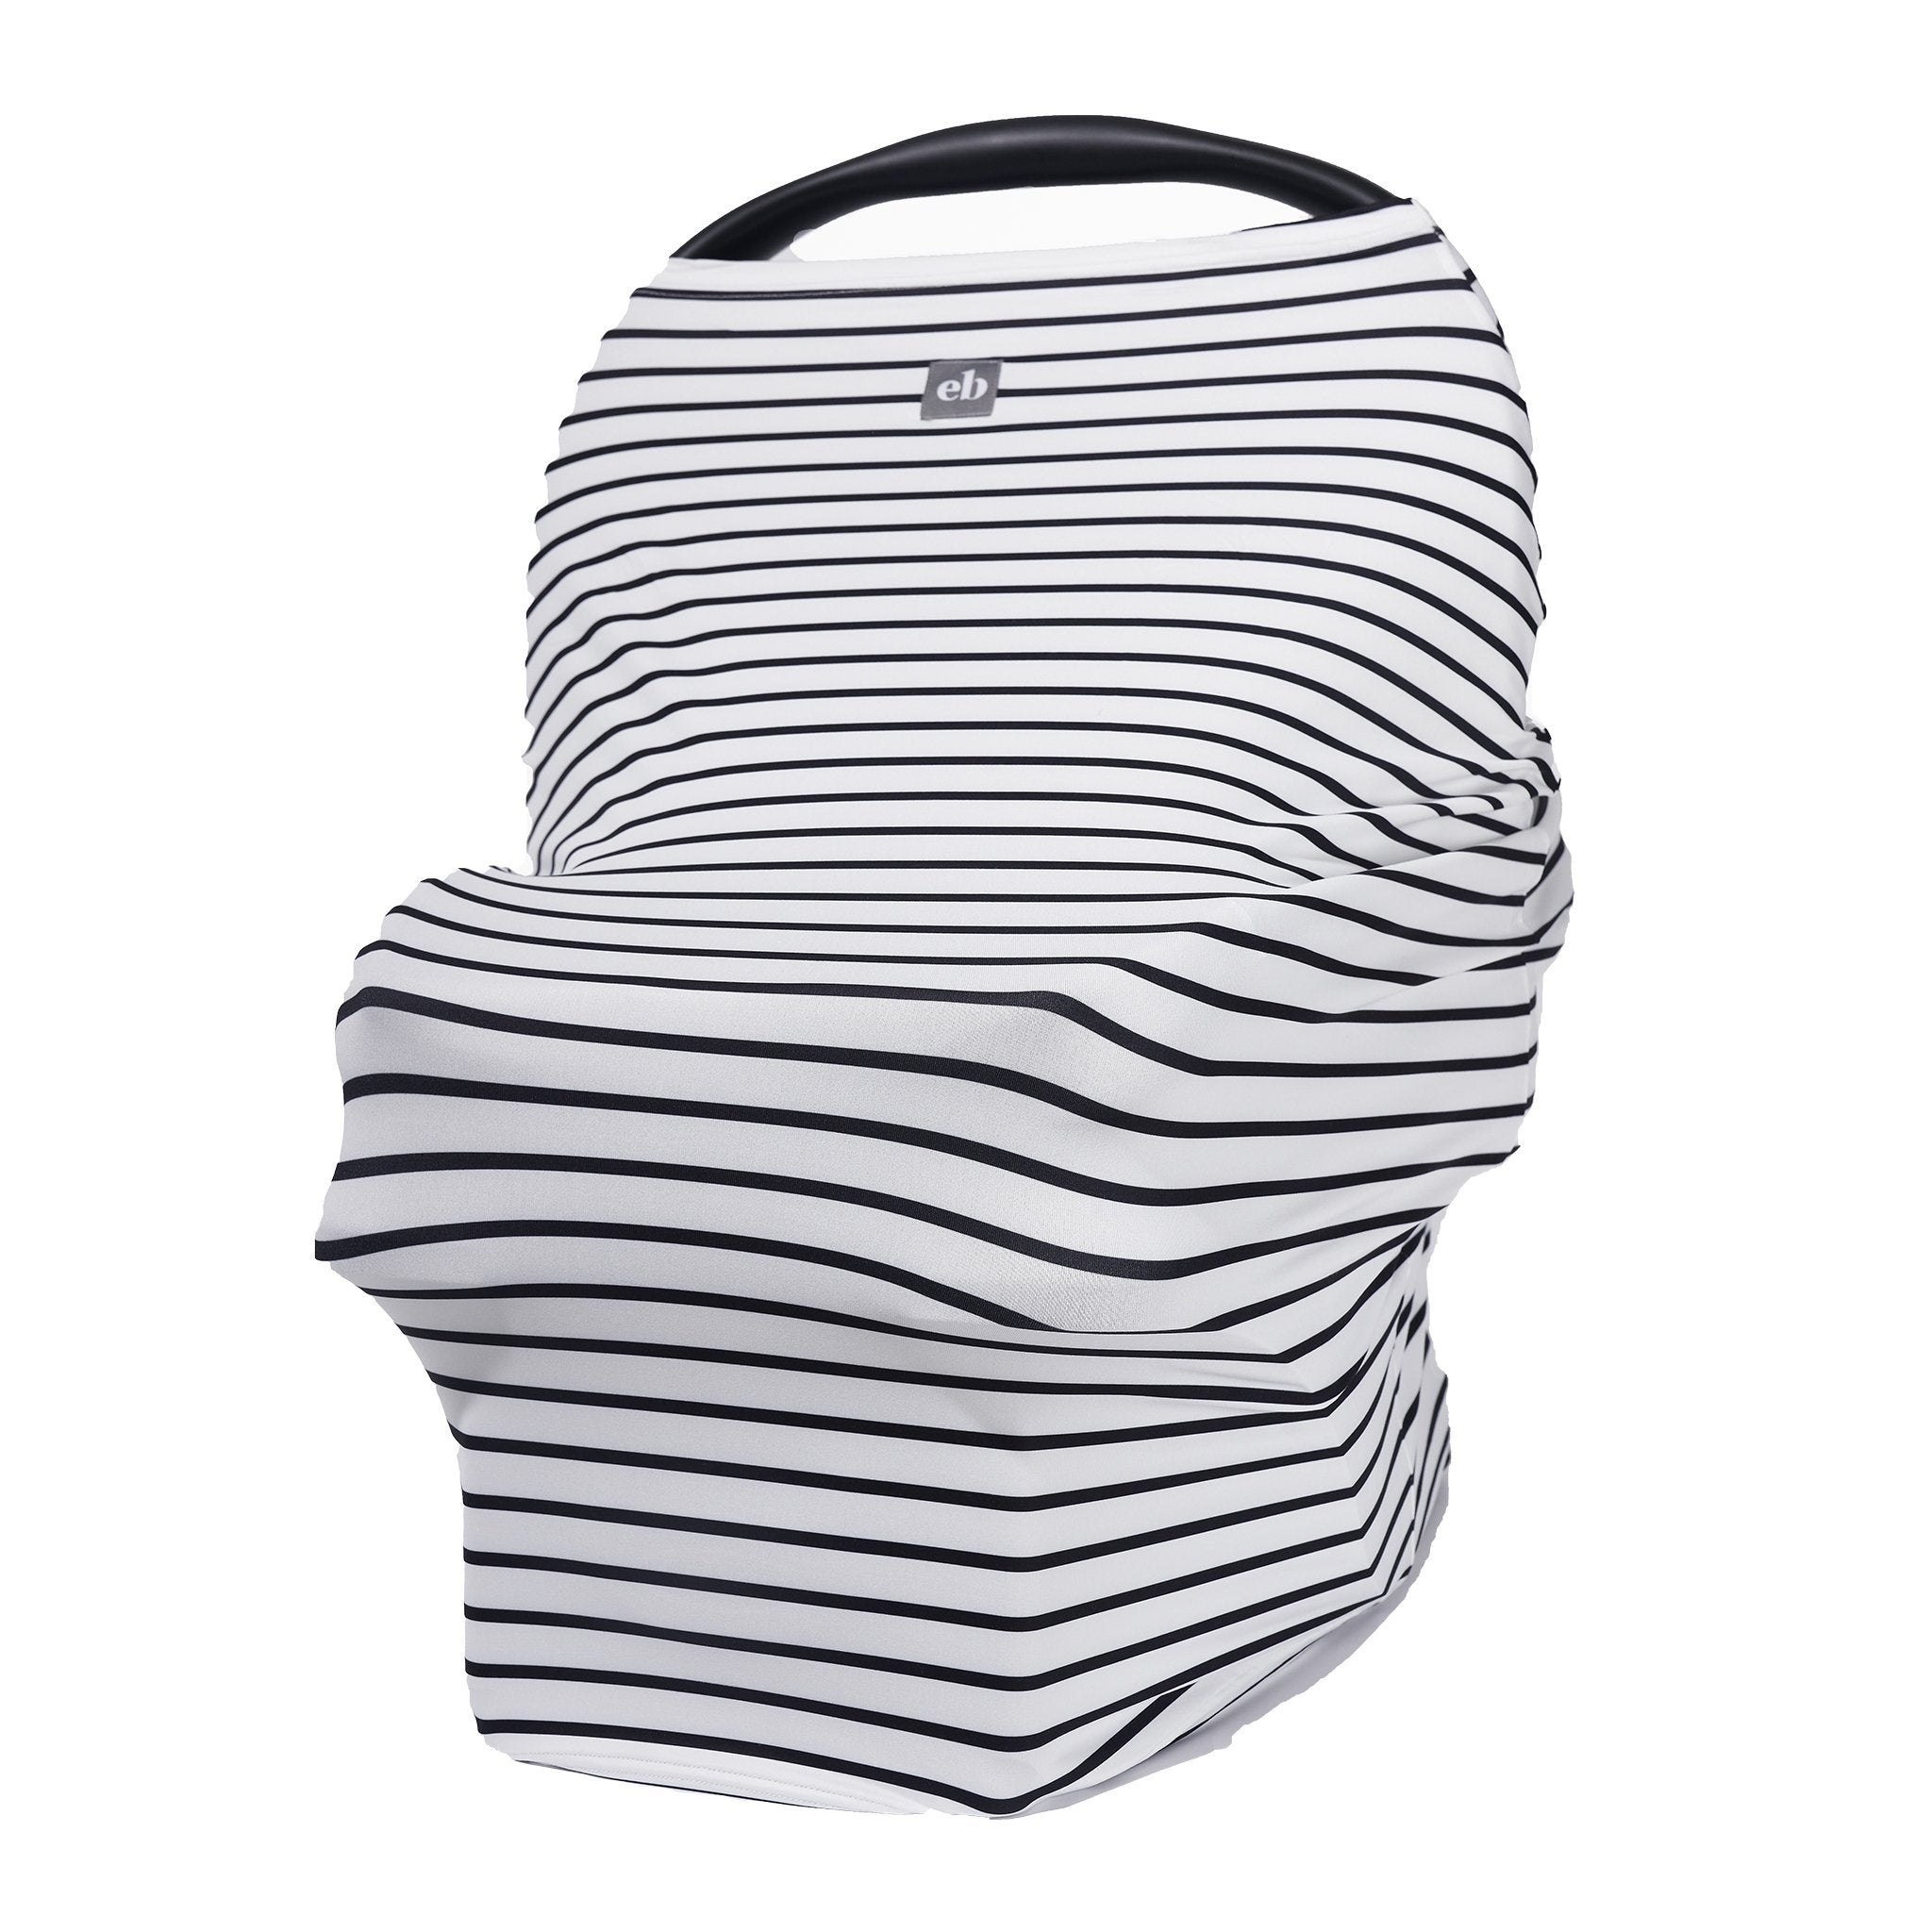 Breathable Nursing Cover | Travel Essential Shopping Cart Cover | Multi-Use Breastfeeding Cover | Functional High Chair Cover | Infinity Scarf | Black and White Pinstripe - EliteBaby